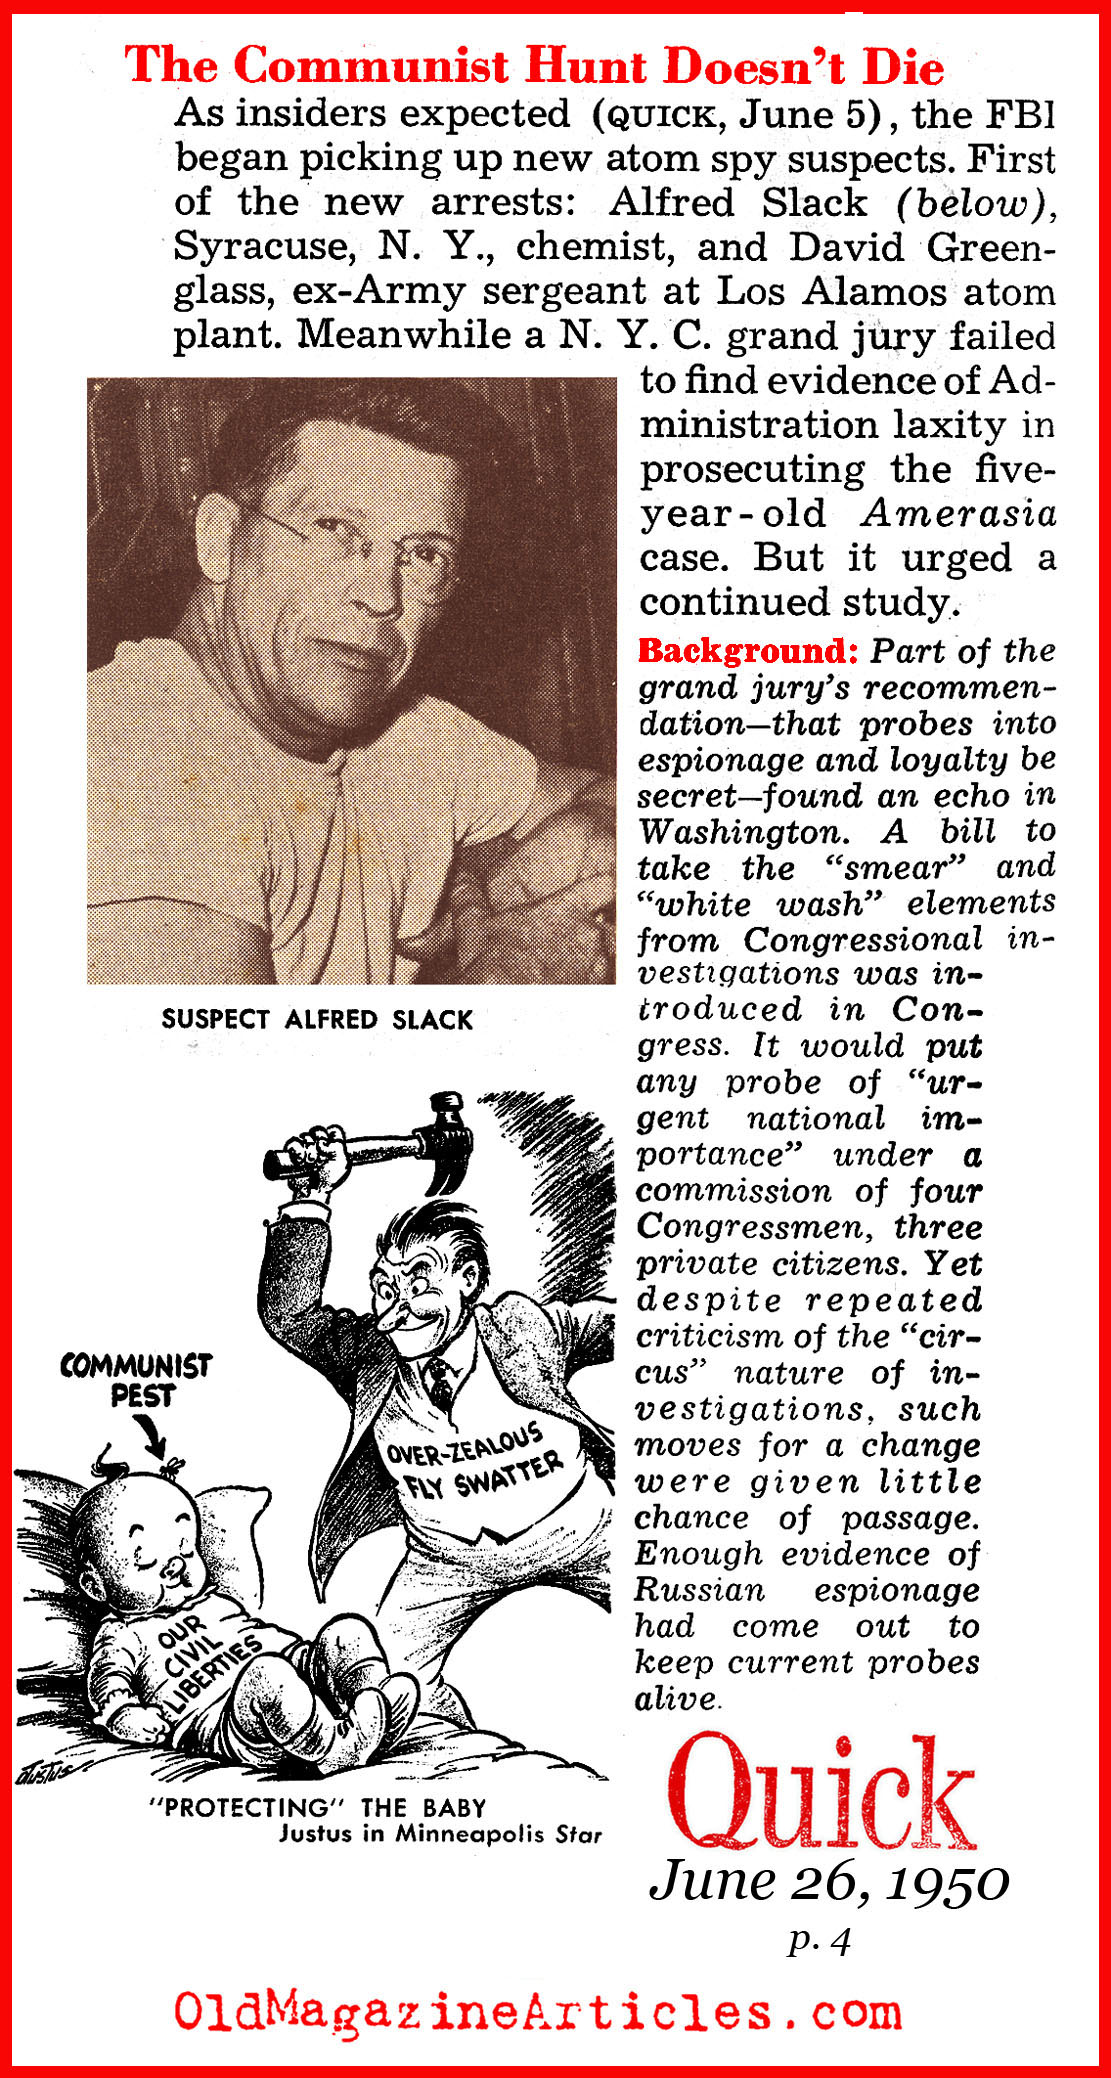 The Arrests of David Greenglass and Alfred Slack (Quick Magazine, 1950)